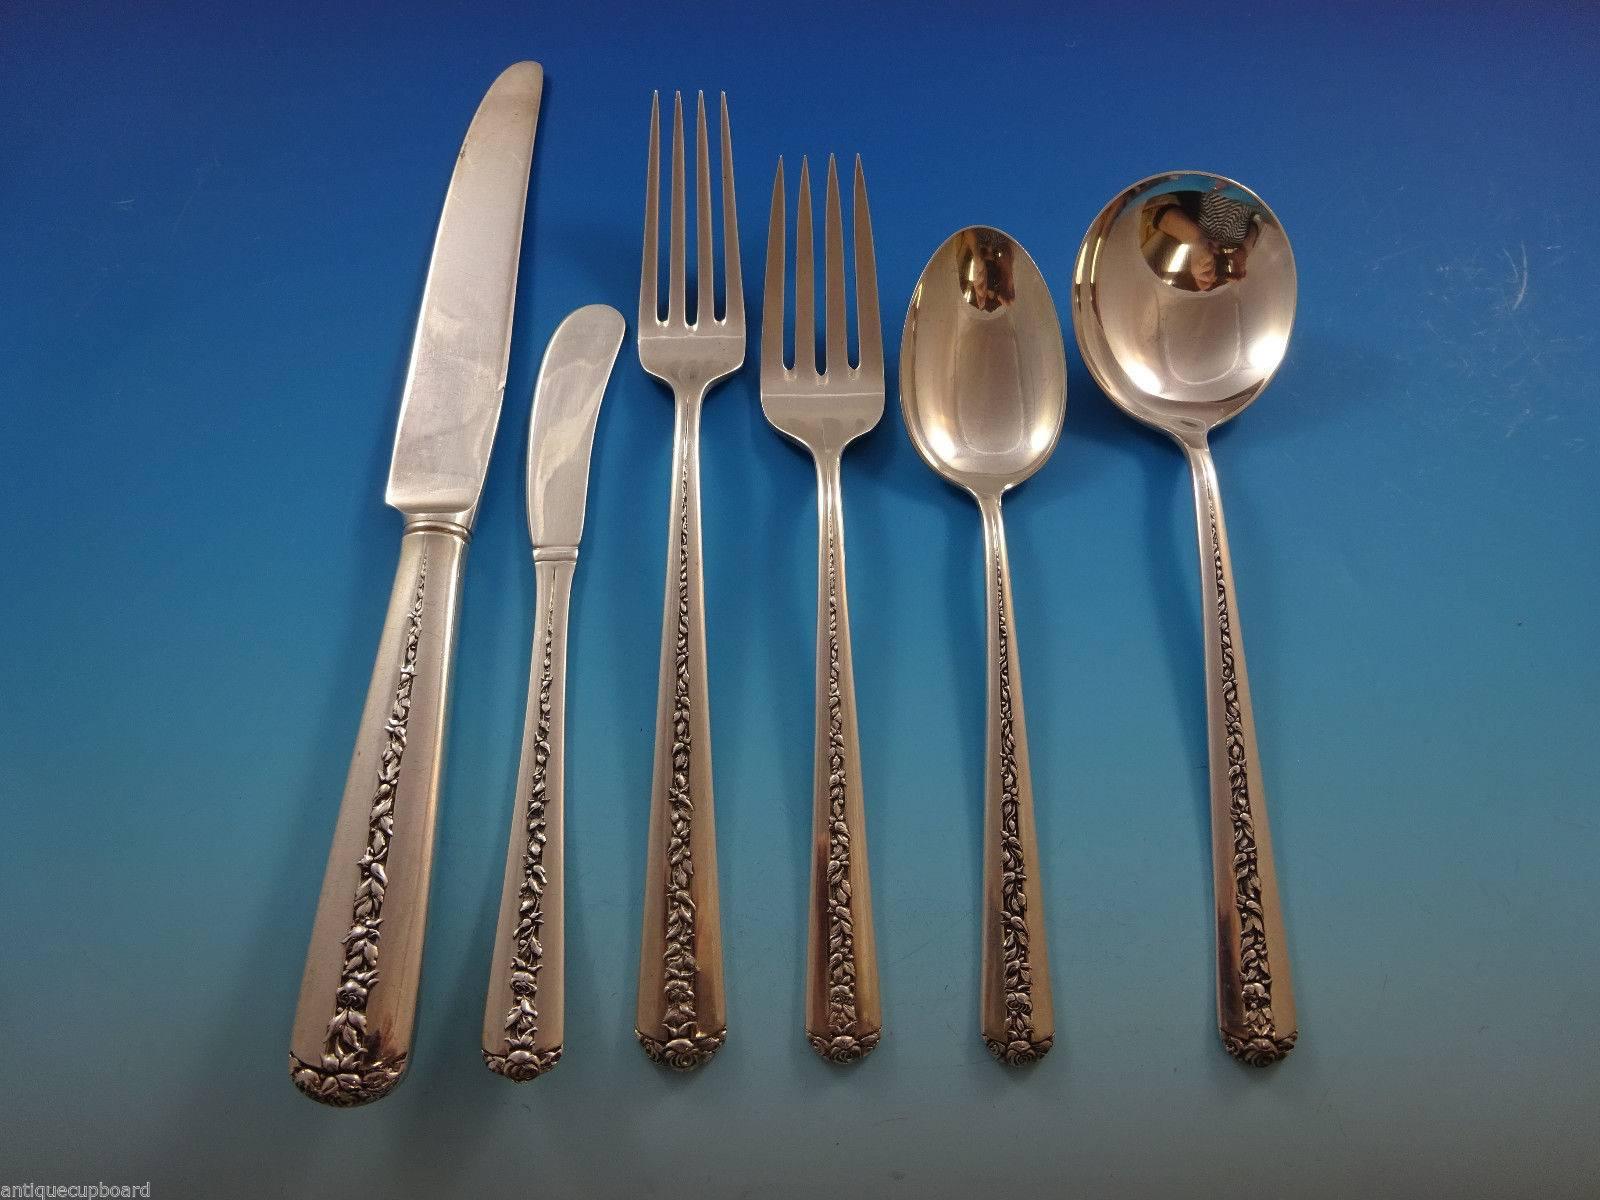 Highly polished sides with a trellis of rambling roses down the center and of the handle best describes the Rambler Rose pattern first introduced by Towle in 1937.
 

 Beautiful Rambler Rose by Towle sterling silver flatware set - 52 pieces. This